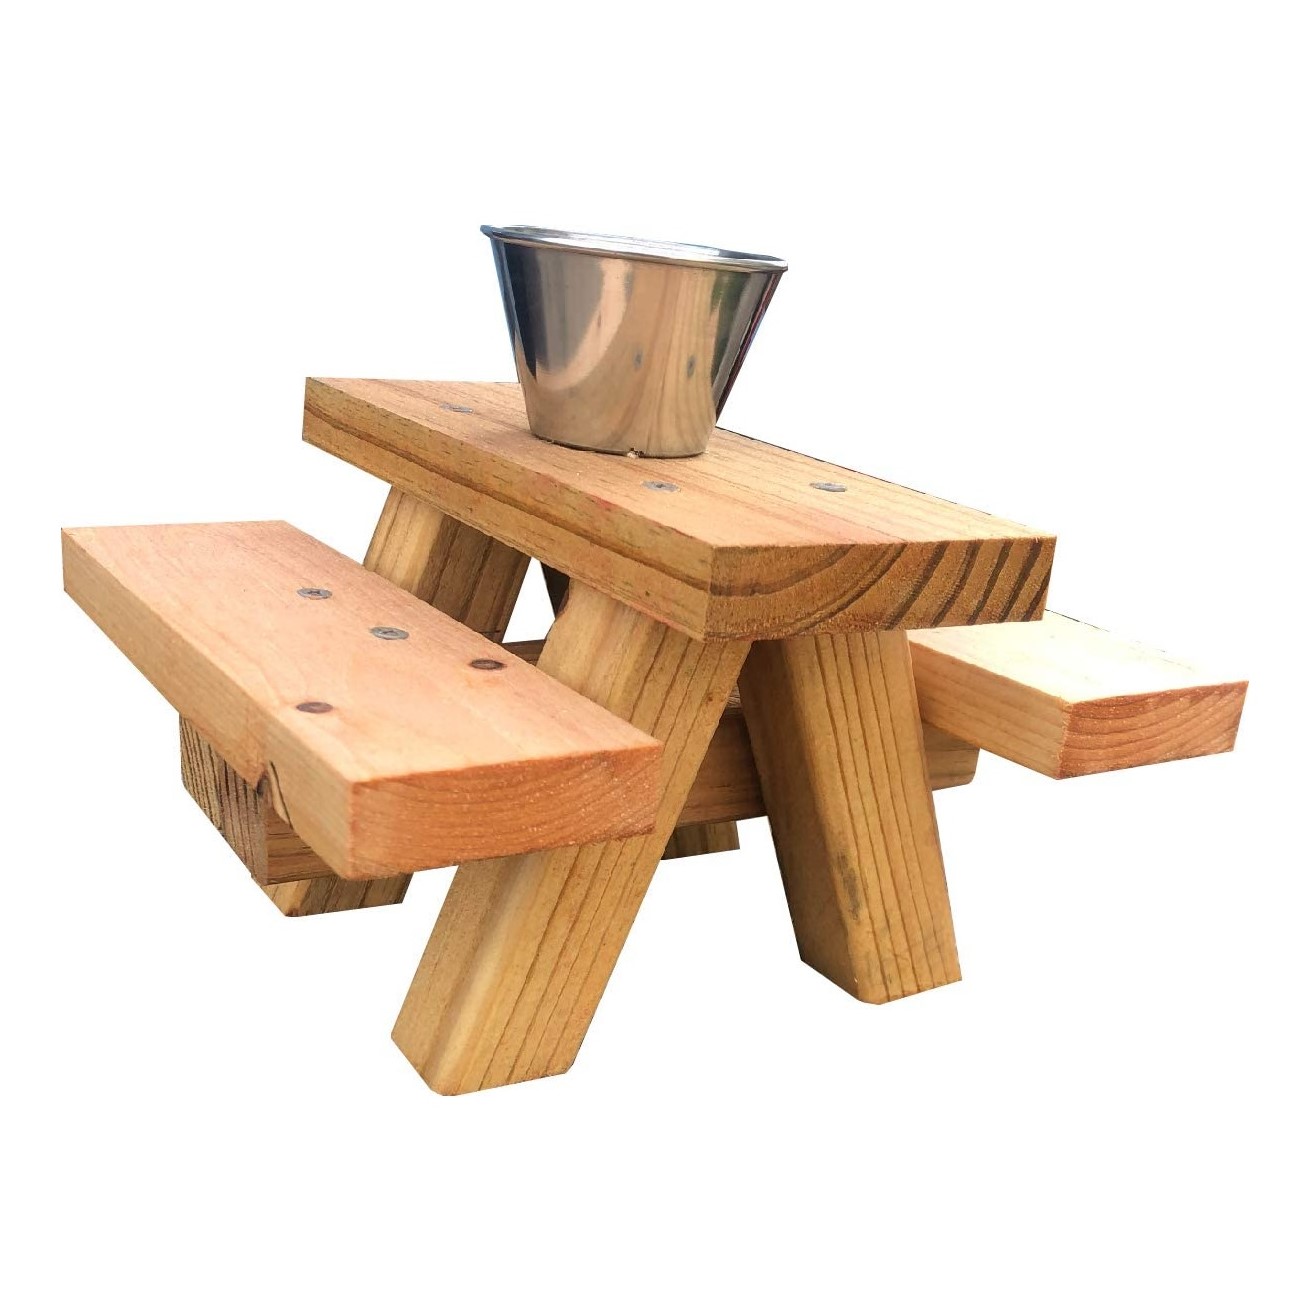 SquirrelSupply.com - Squirrel Feeder Picnic Table with Cup Feed - Floor or Table Top Mount - Stained - Large Size - Hand Made in USA - No Tools Required